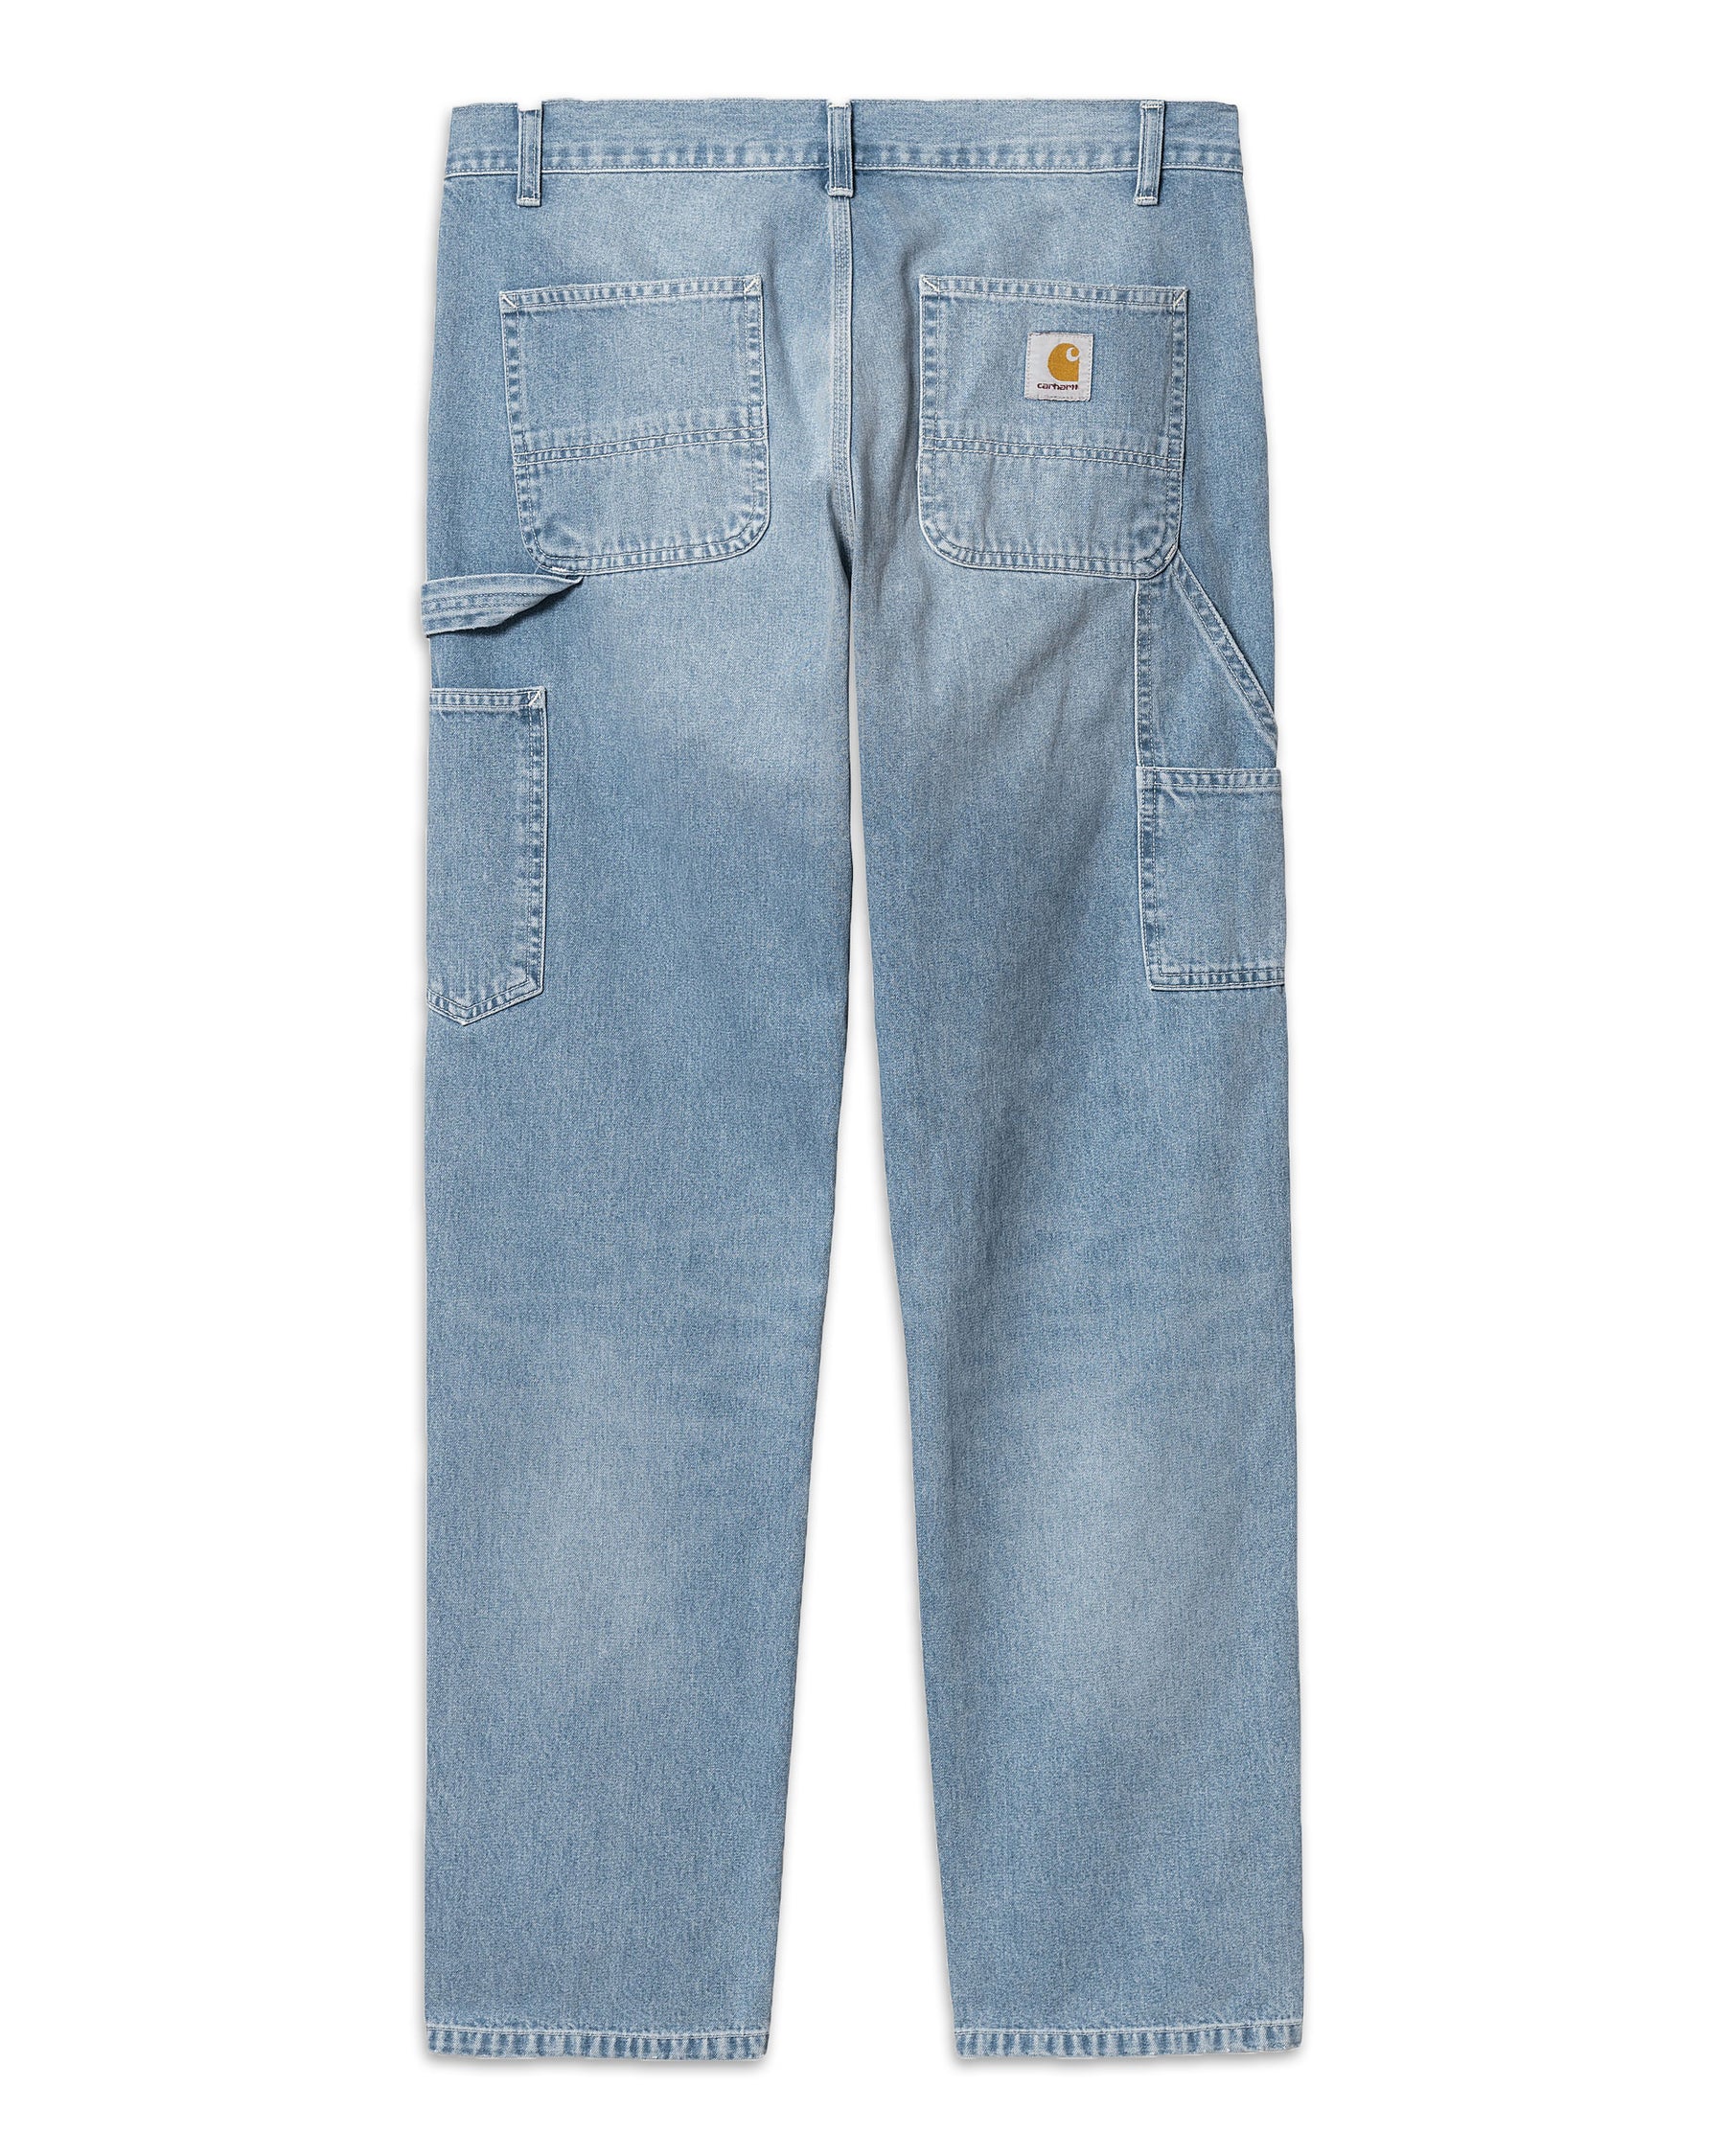 Jeans Carhartt Wip Ruck Single Knee Pant Blue Light True Washed